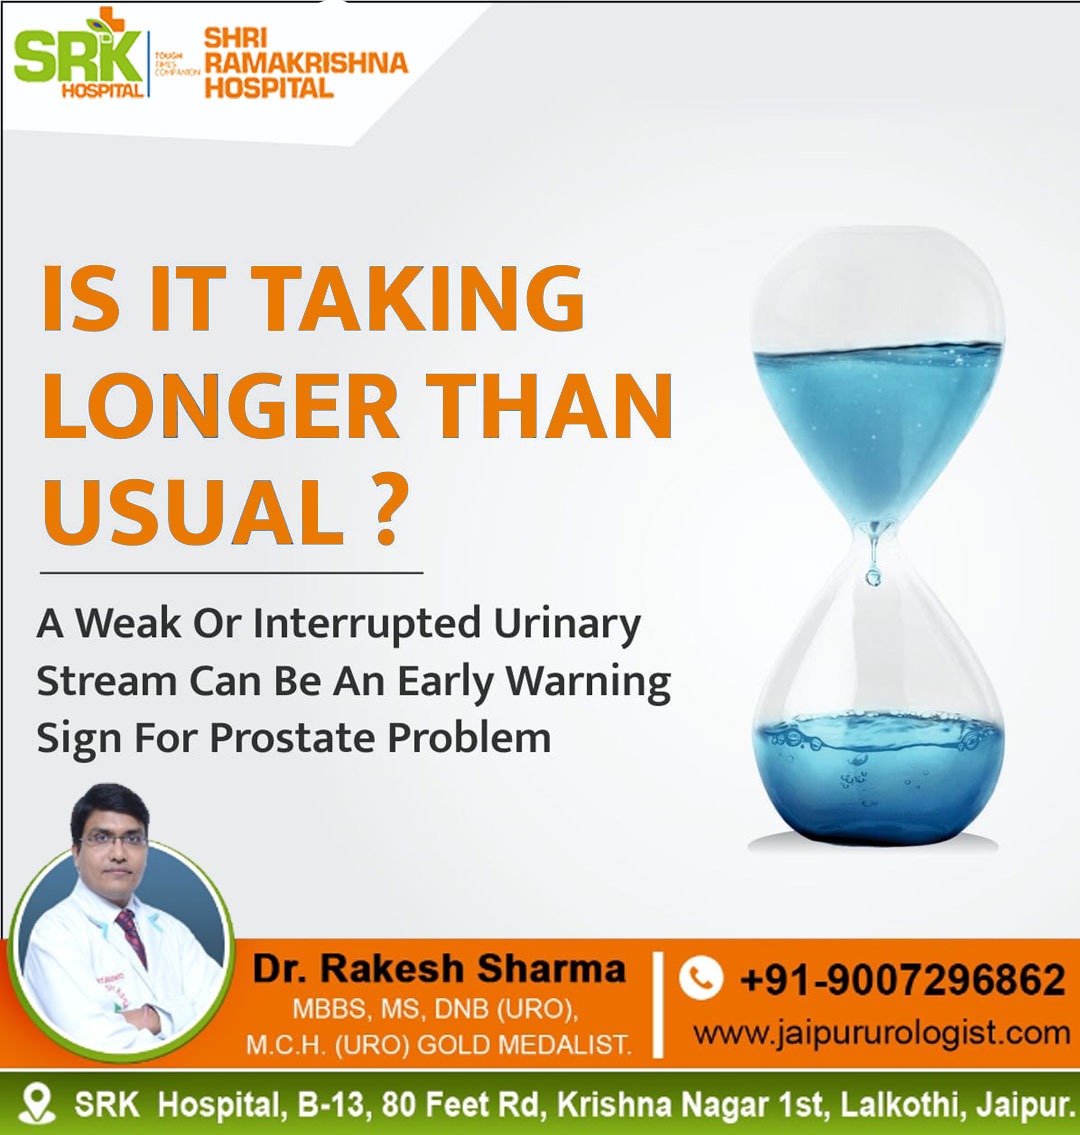 Book an appointment with Dr Rakesh Sharma The appointment available on call at: 09007296862. or website jaipururologist.com #DrRakeshSharma #Urologist #UrologistInJaipur #KidneyStone #KidneyTransplantation #slipdisctreatment #kidneytransplant #kidney #laparoscopicsurgery